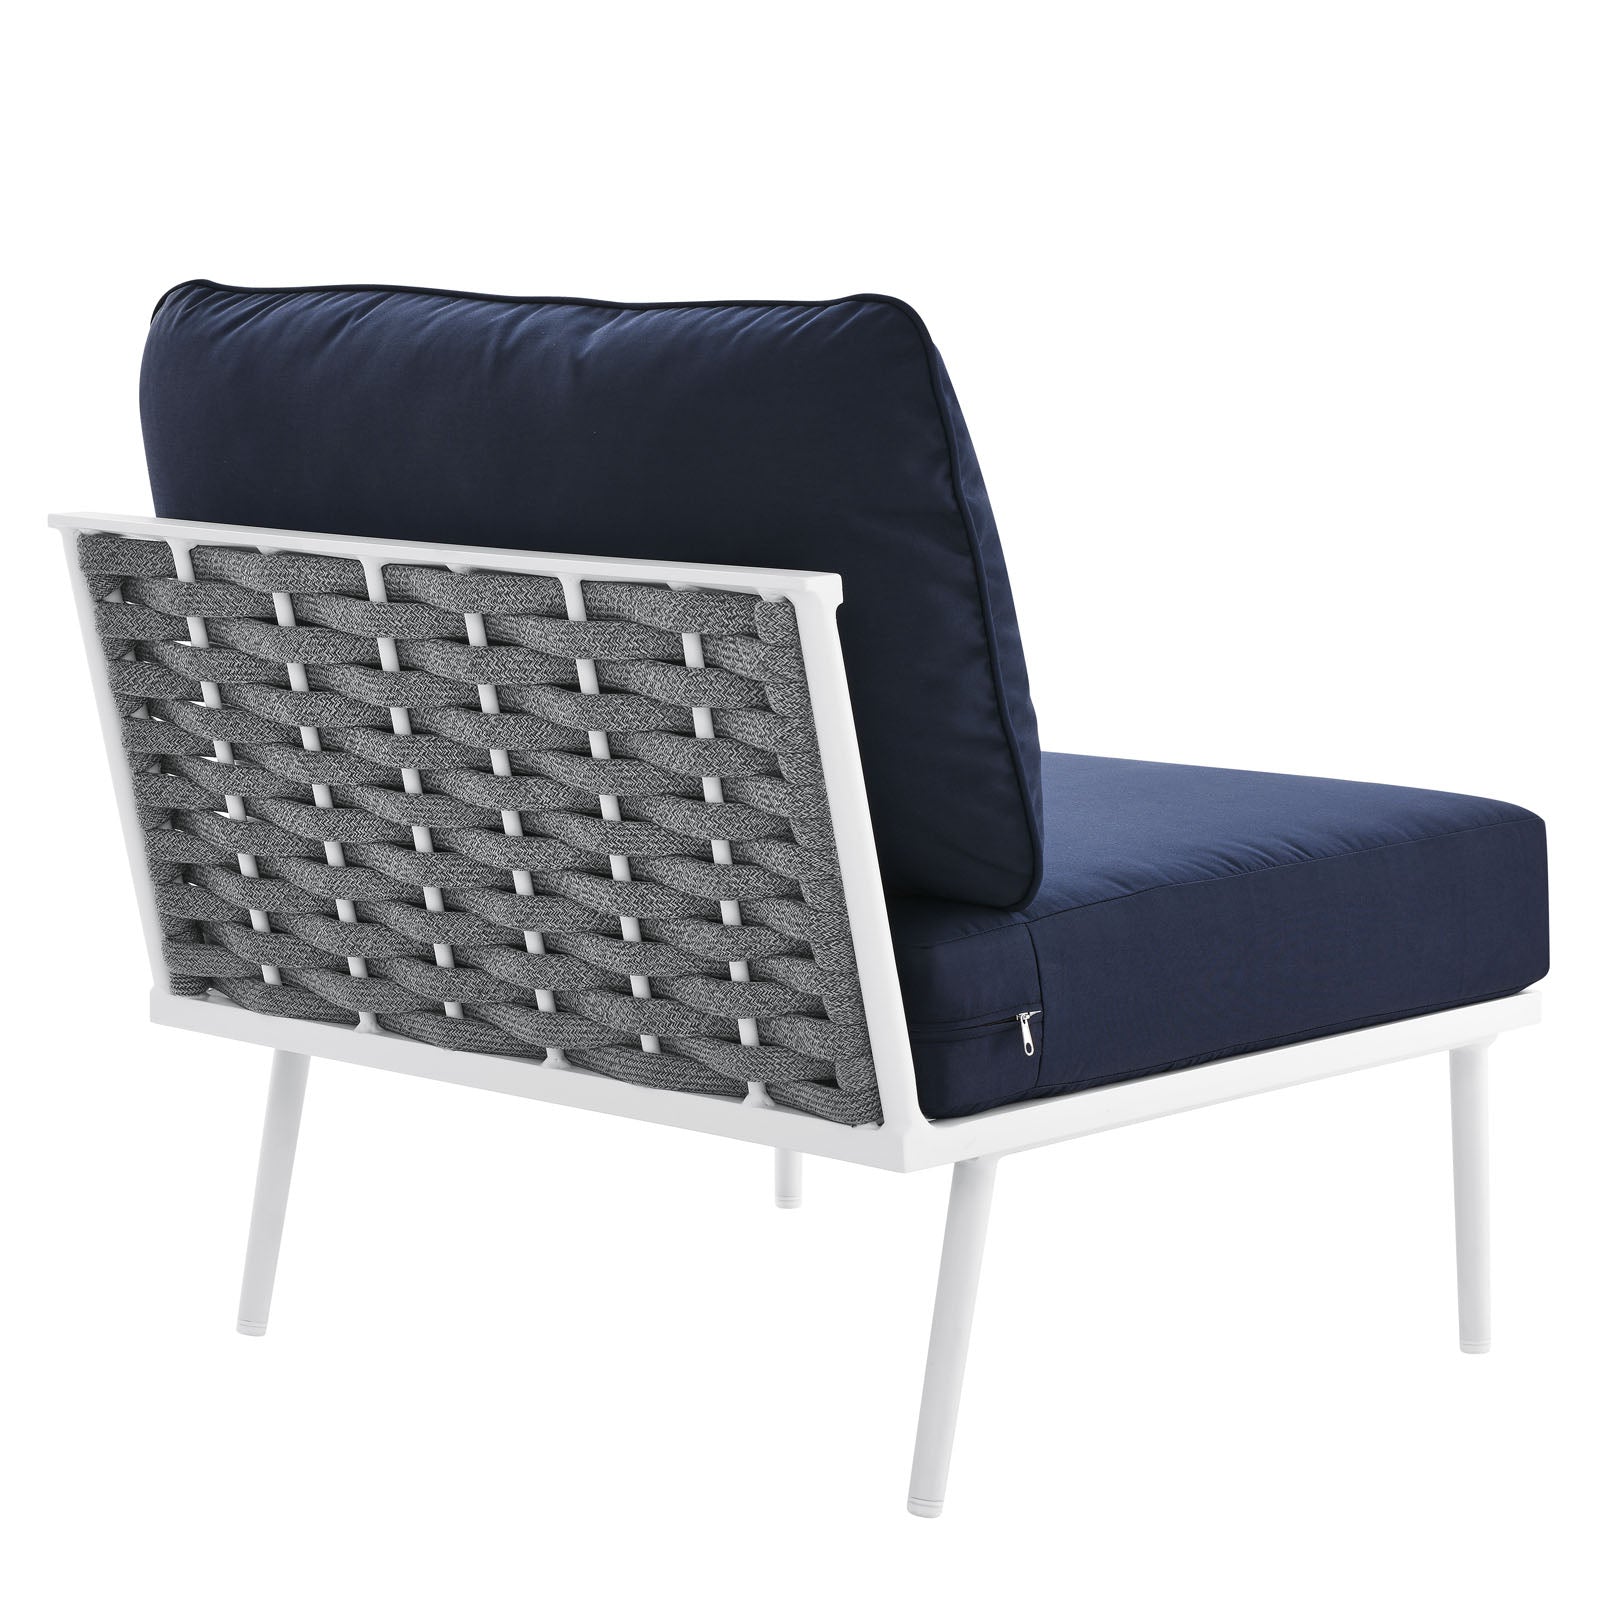 Stance Outdoor Patio Aluminum Armless Chair - East Shore Modern Home Furnishings